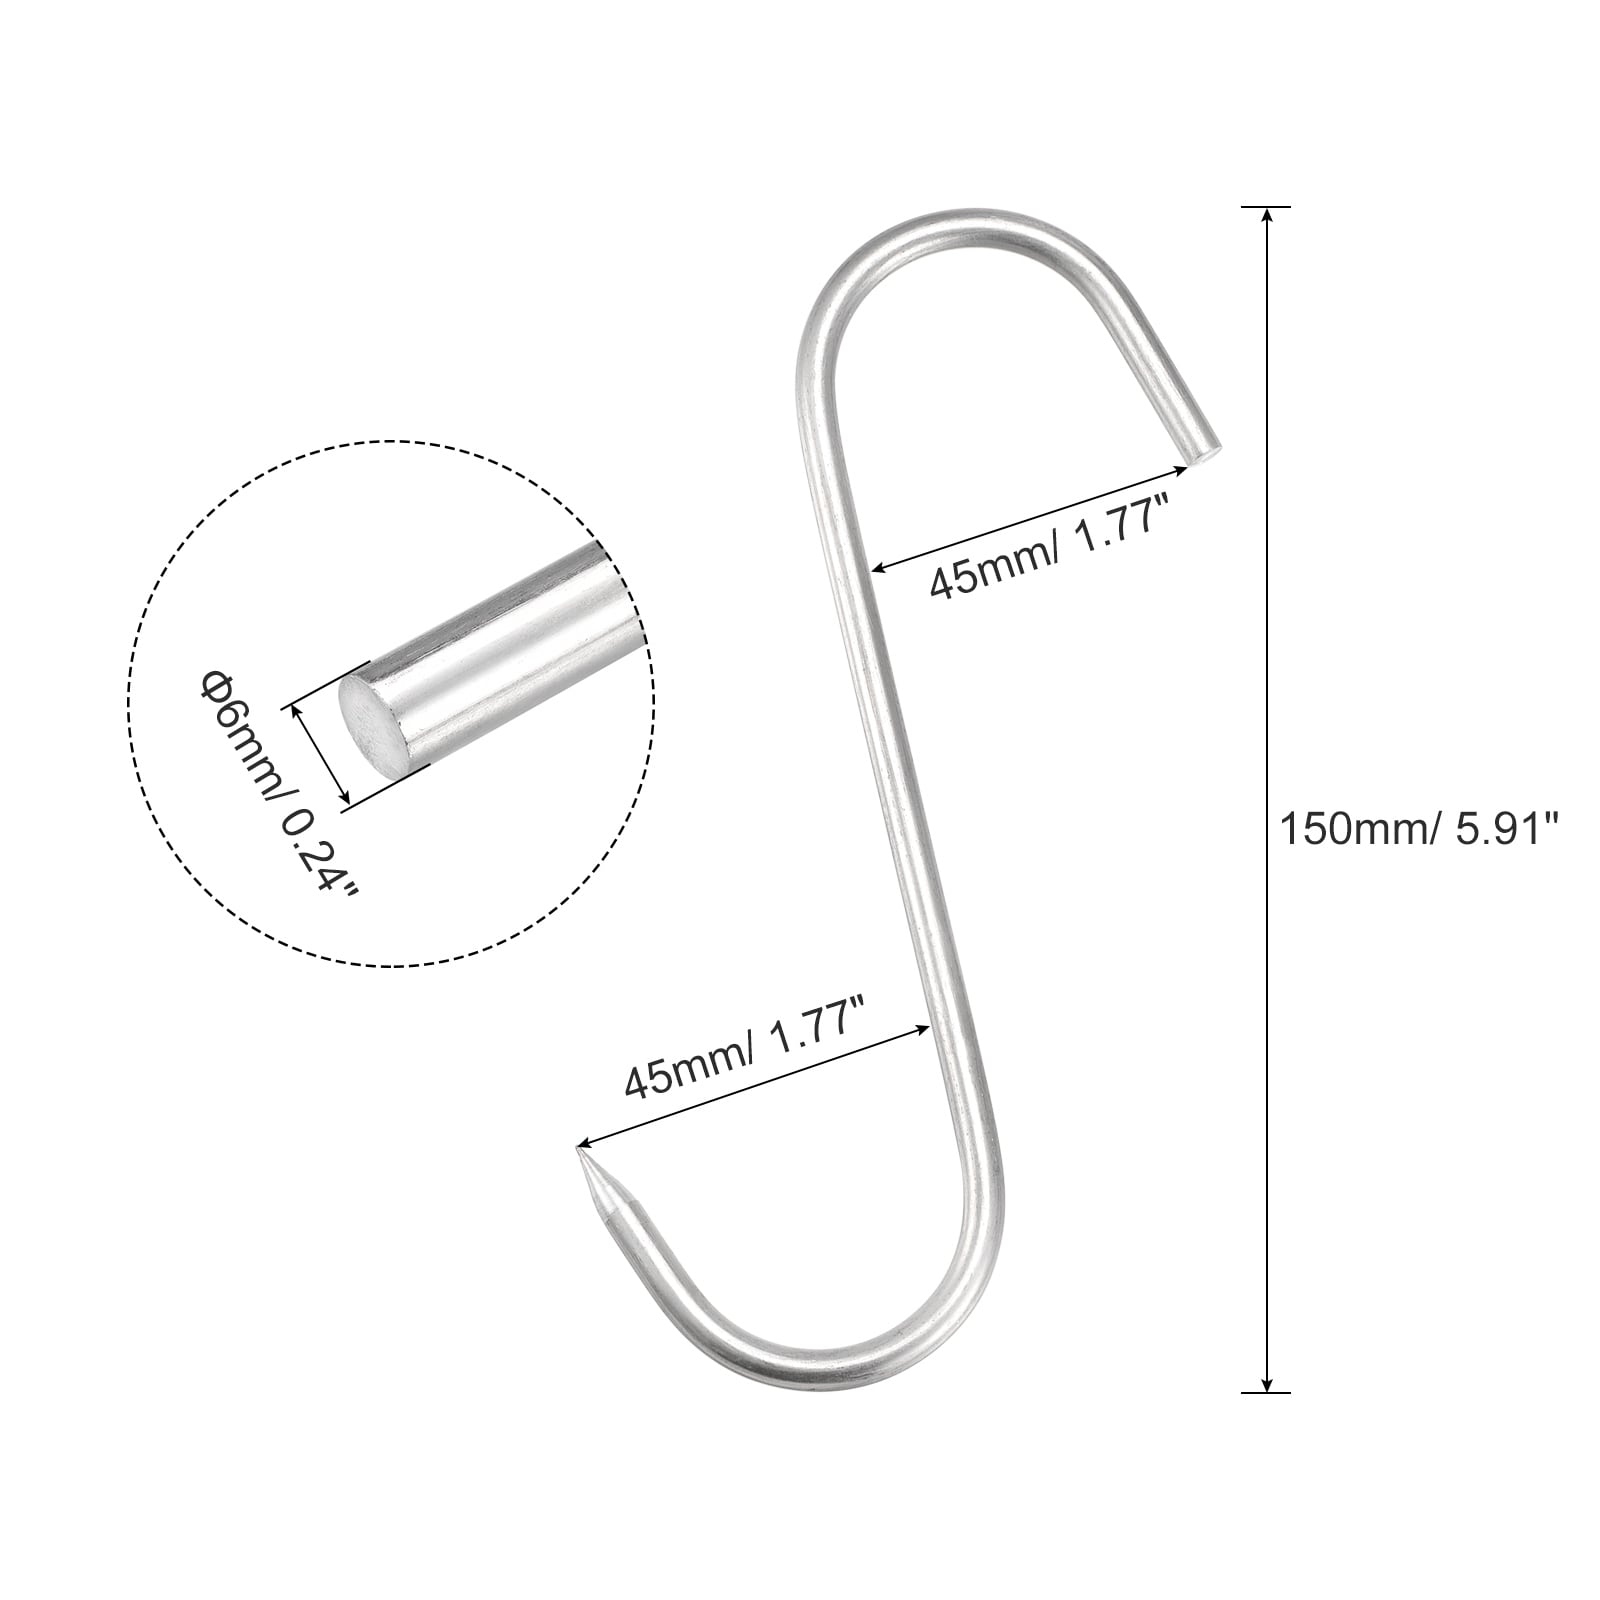 5.91 Meat Hooks, 0.24 Thick Stainless Steel S-Hook Meat Processing 1Pcs -  Silver Tone